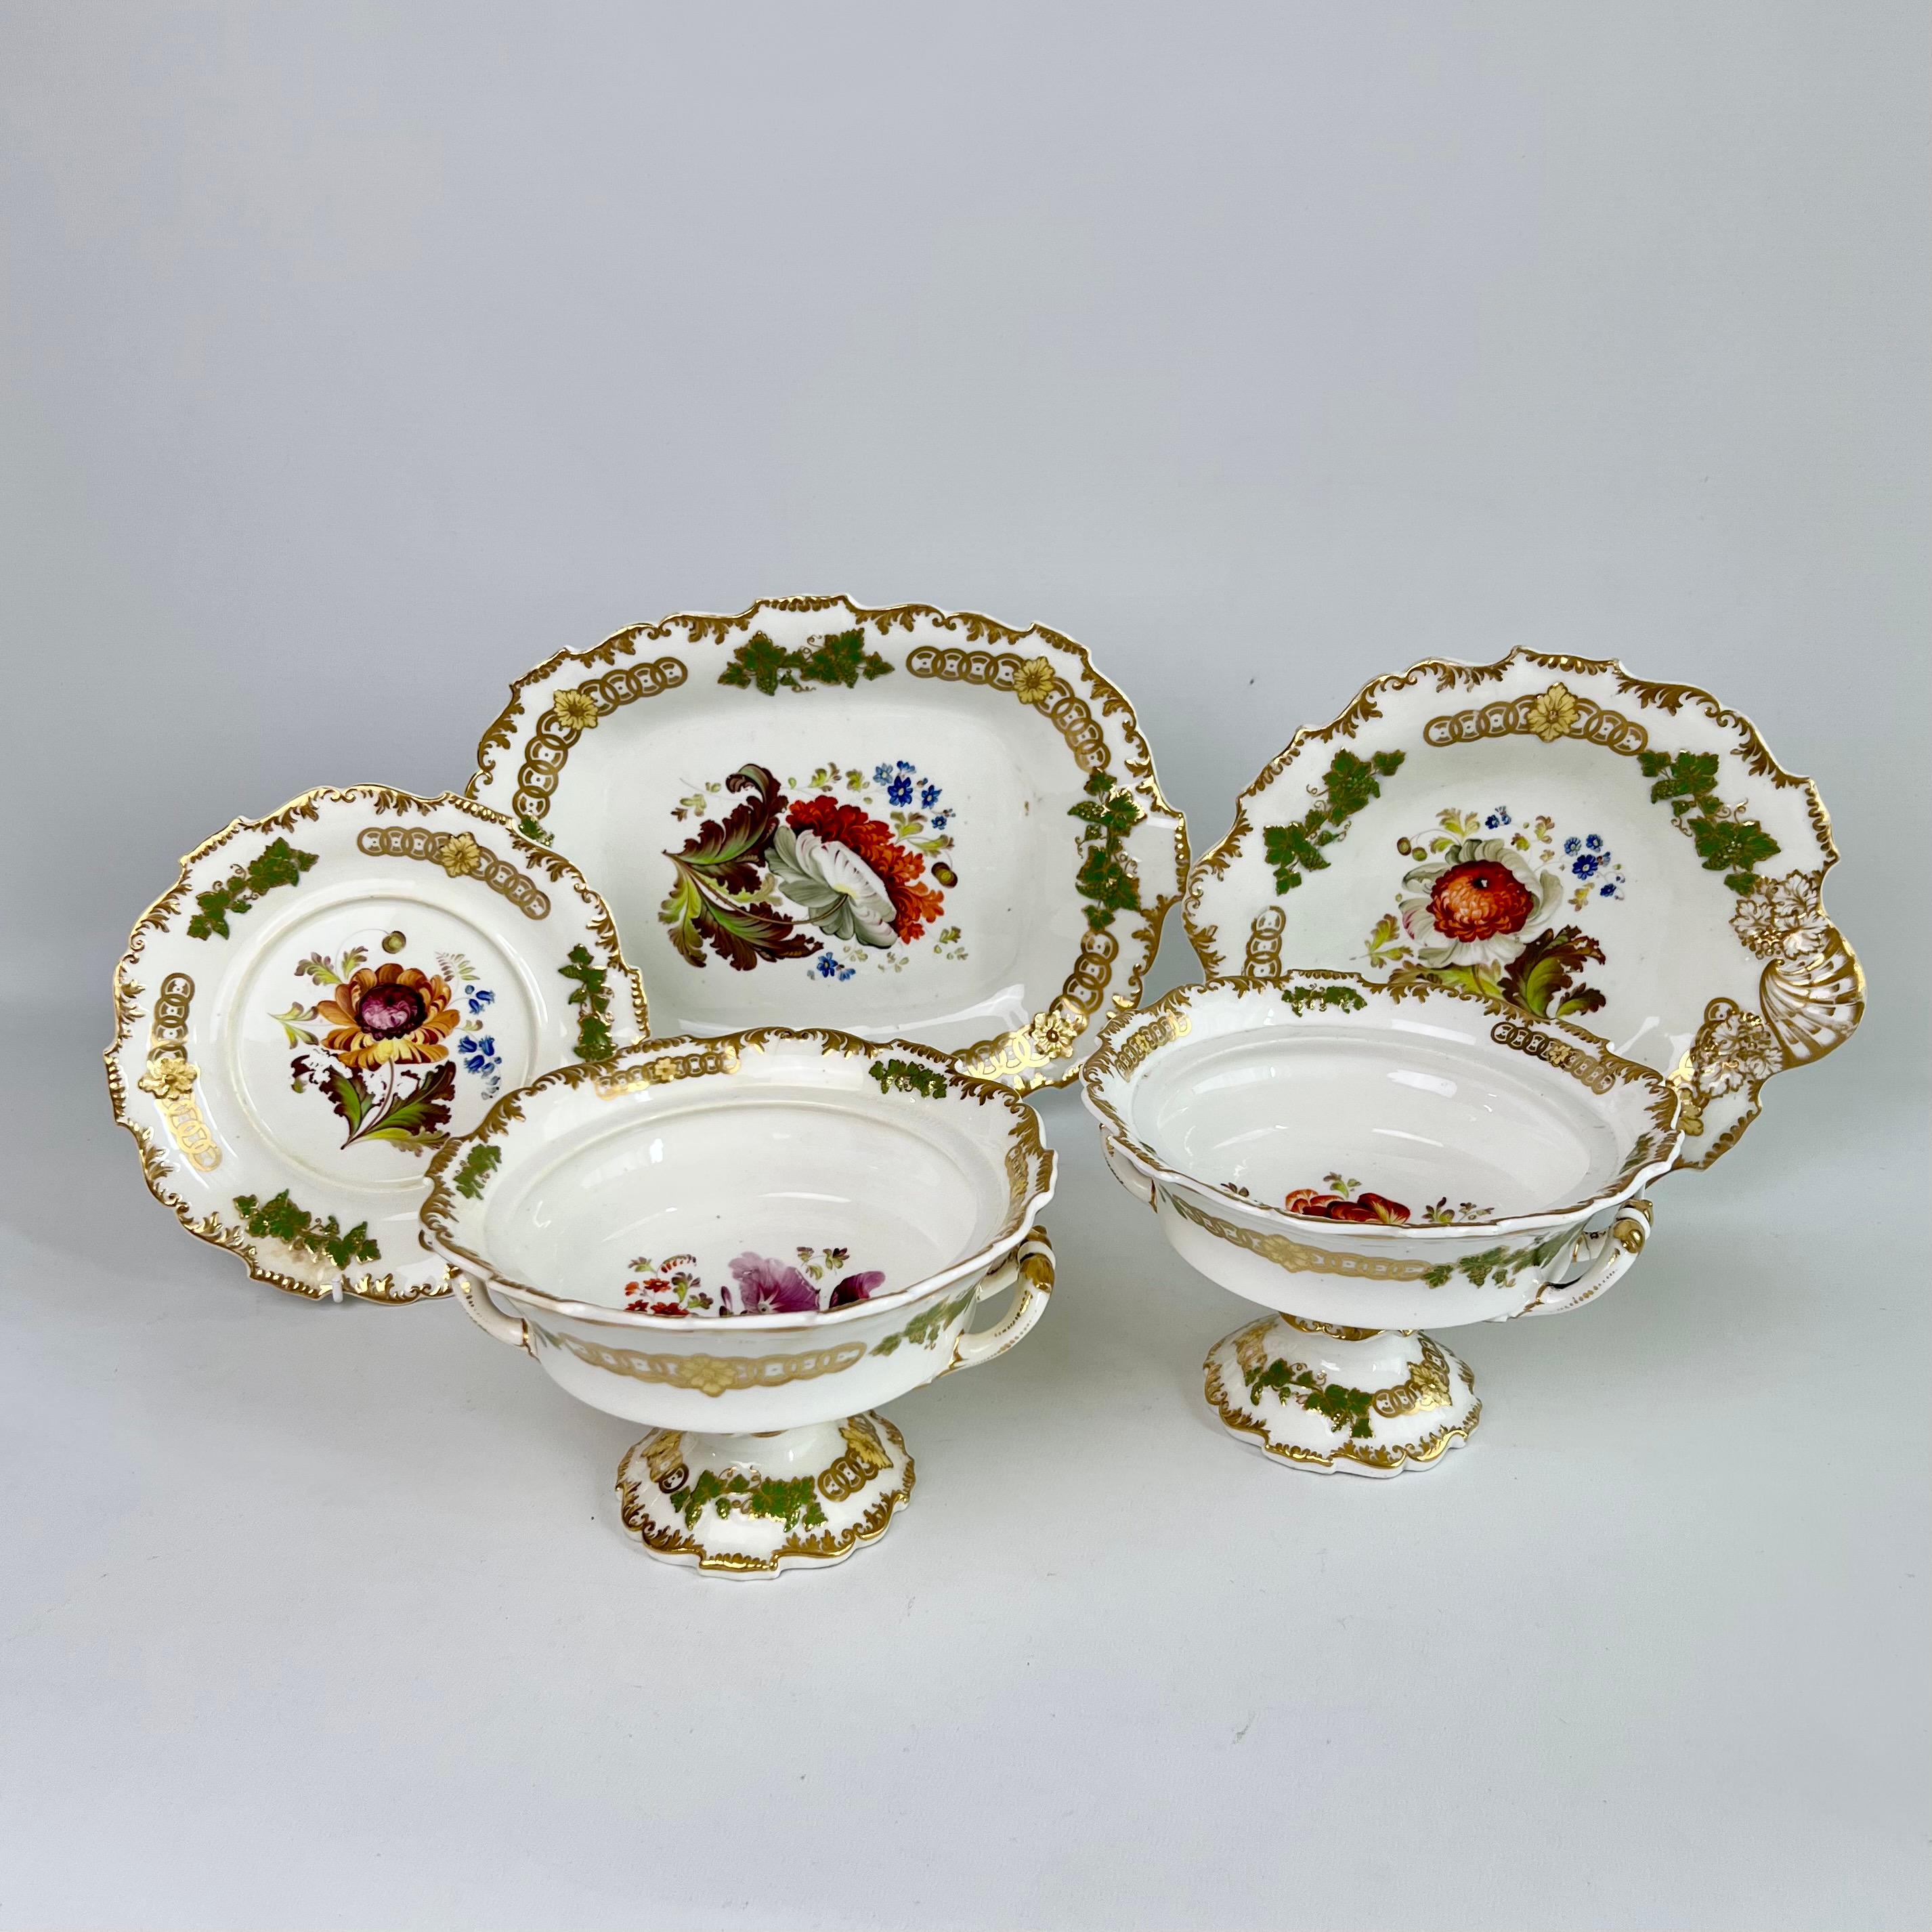 This is a stunning shell dish made by H&R Daniel in about 1827. It is made in the popular Shrewsbury shape and has a beautiful white and red ranunculus in the centre. This dish would have belonged to a large dessert service.

Due to the stress